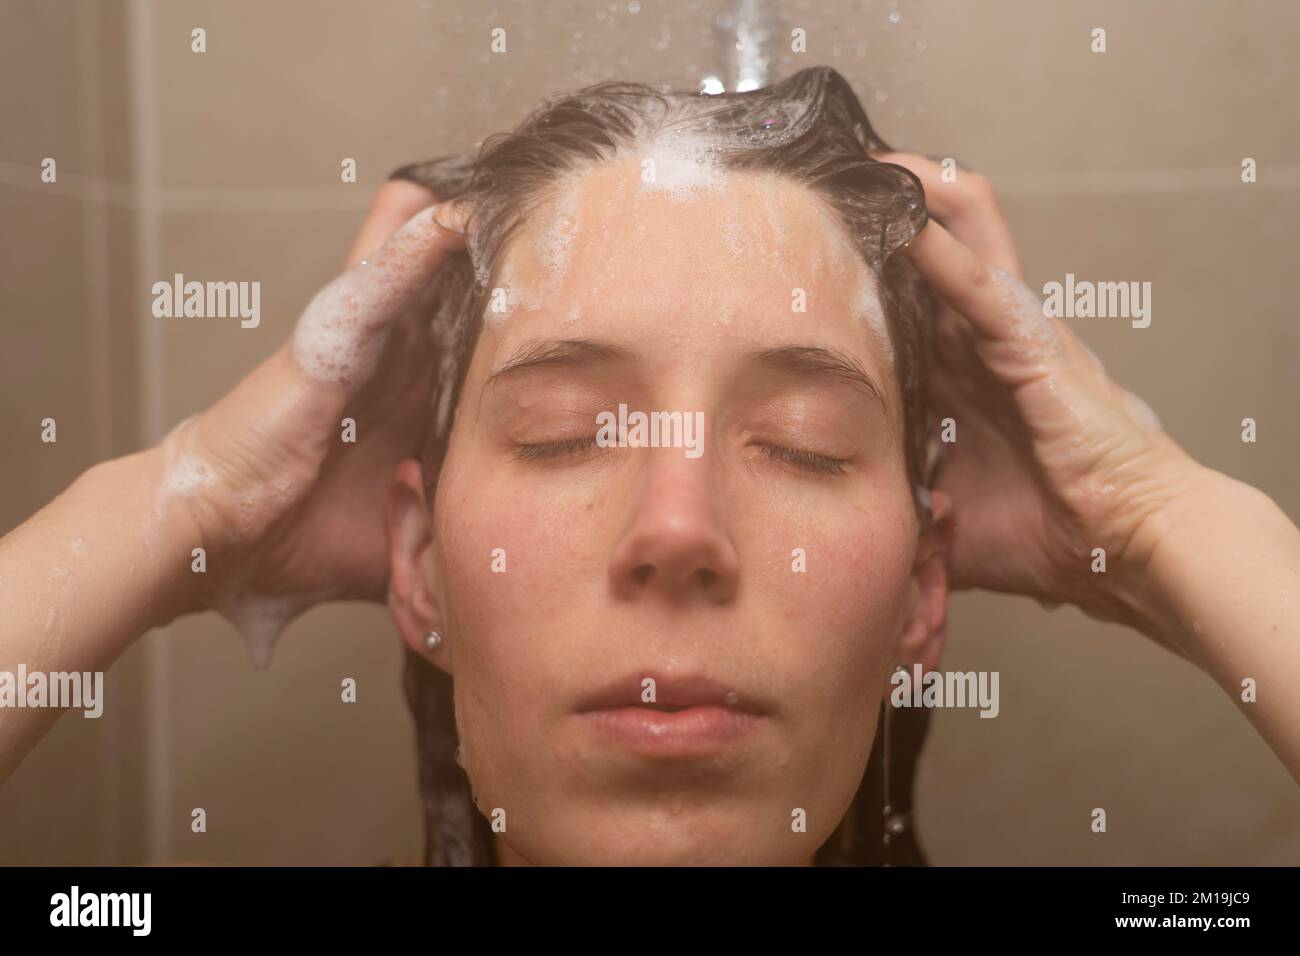 A Woman In Her Thirties Washing Her Hair In The Shower With Her Eyes Shut And Rubbing Shampoo